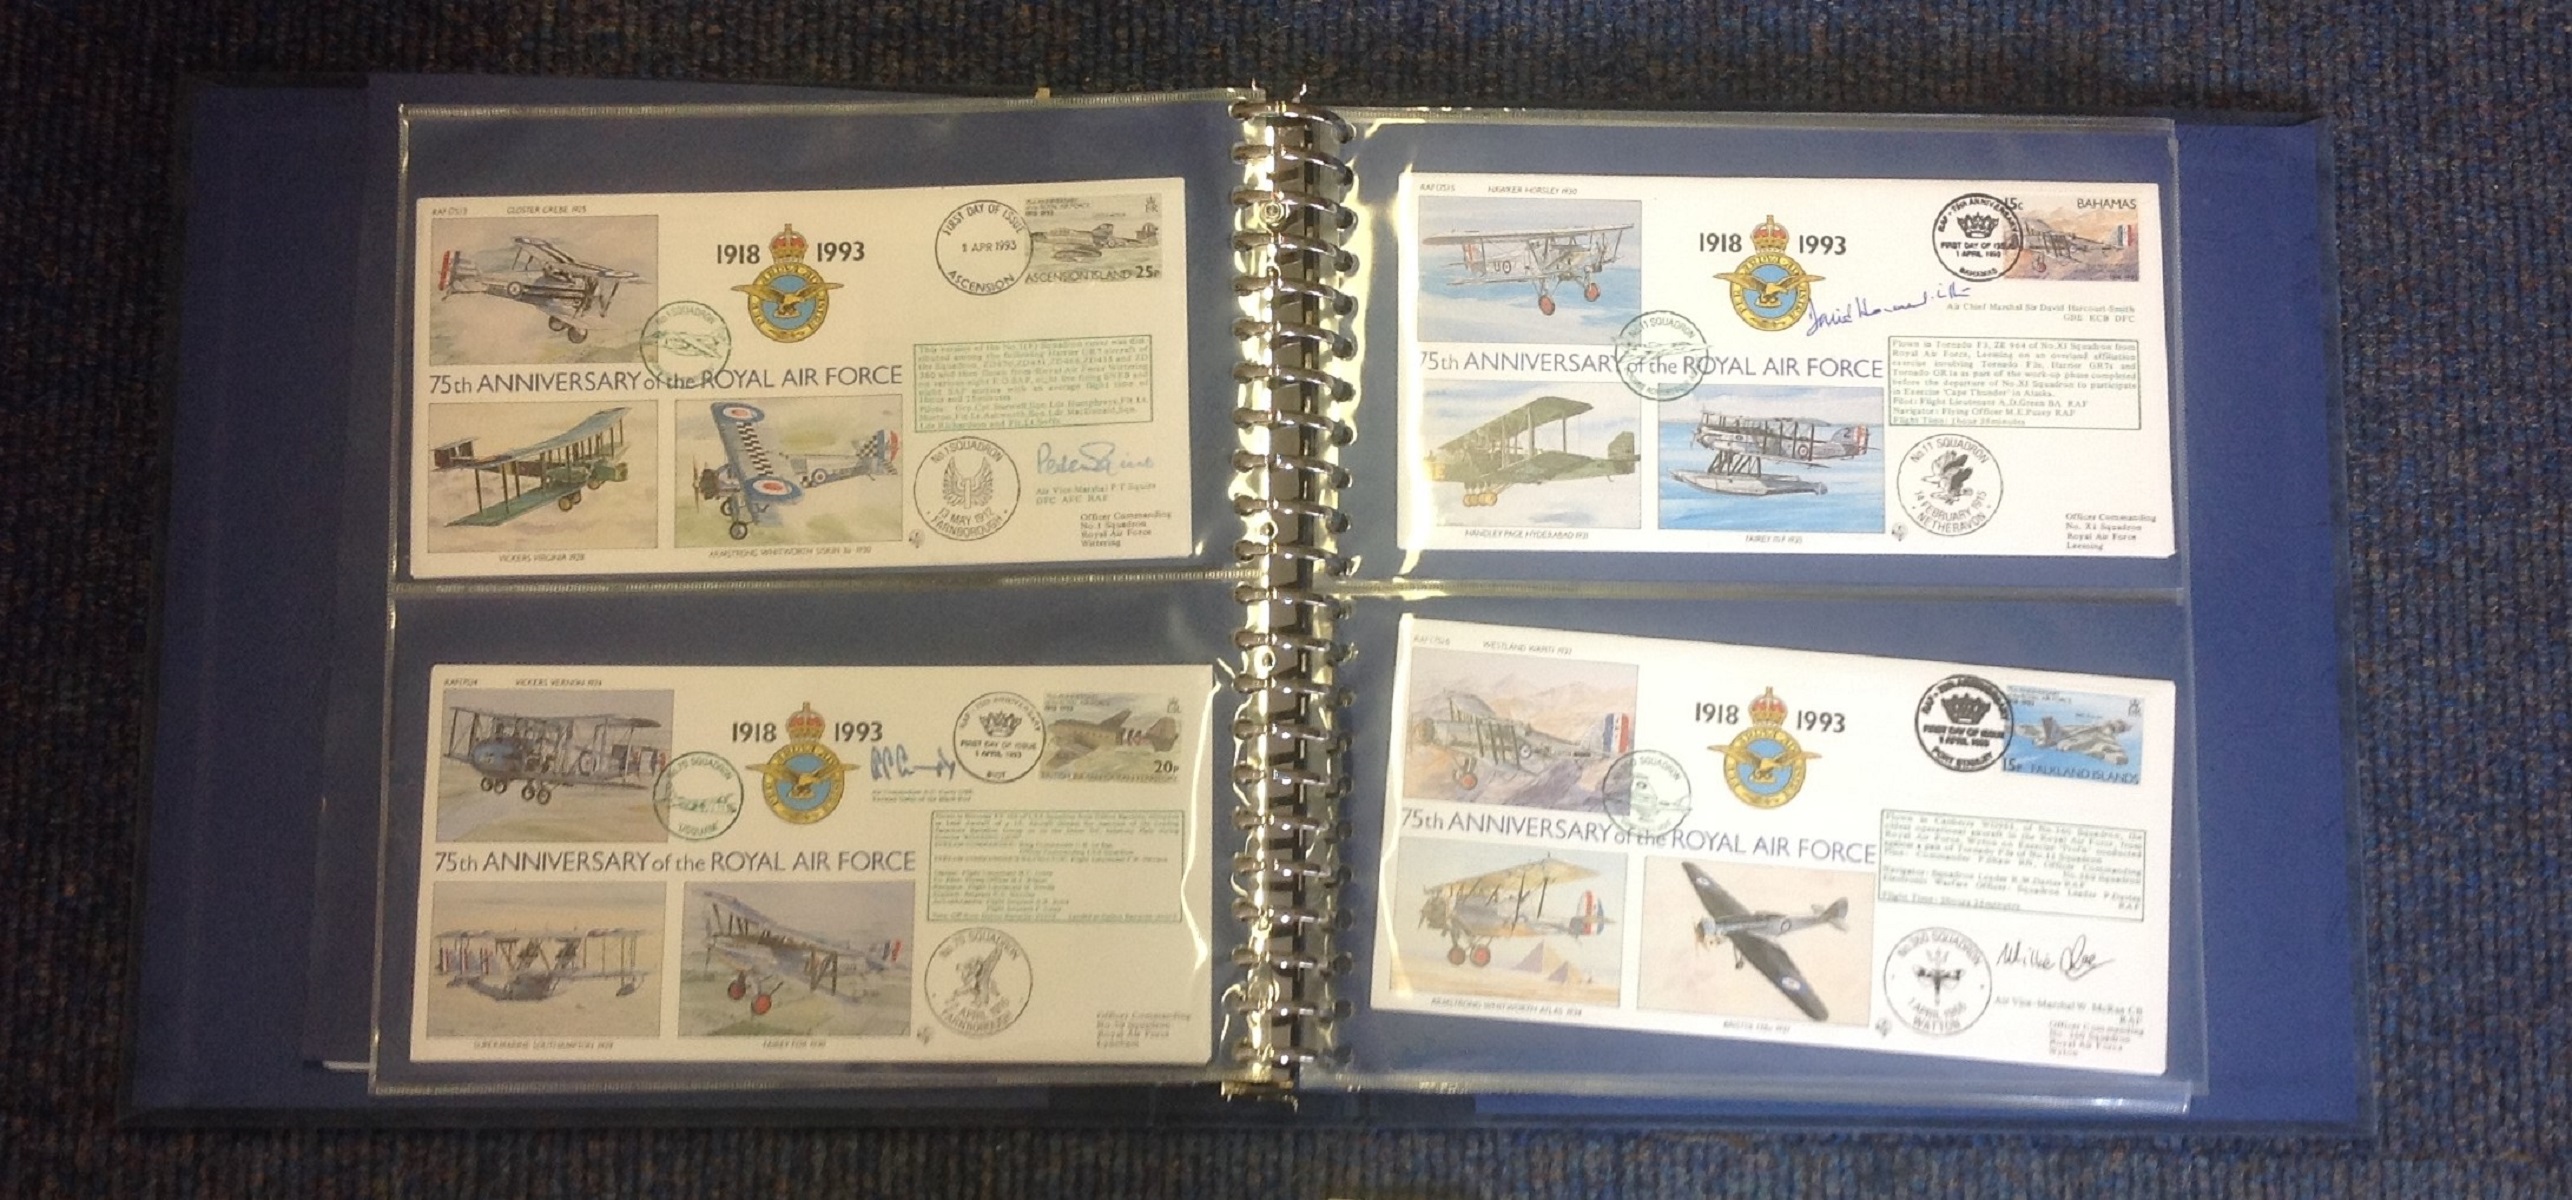 75th Ann RAF VIP signed collection. Complete set of the 30 covers in Blue Logoed RAF Album. Covers - Image 2 of 6